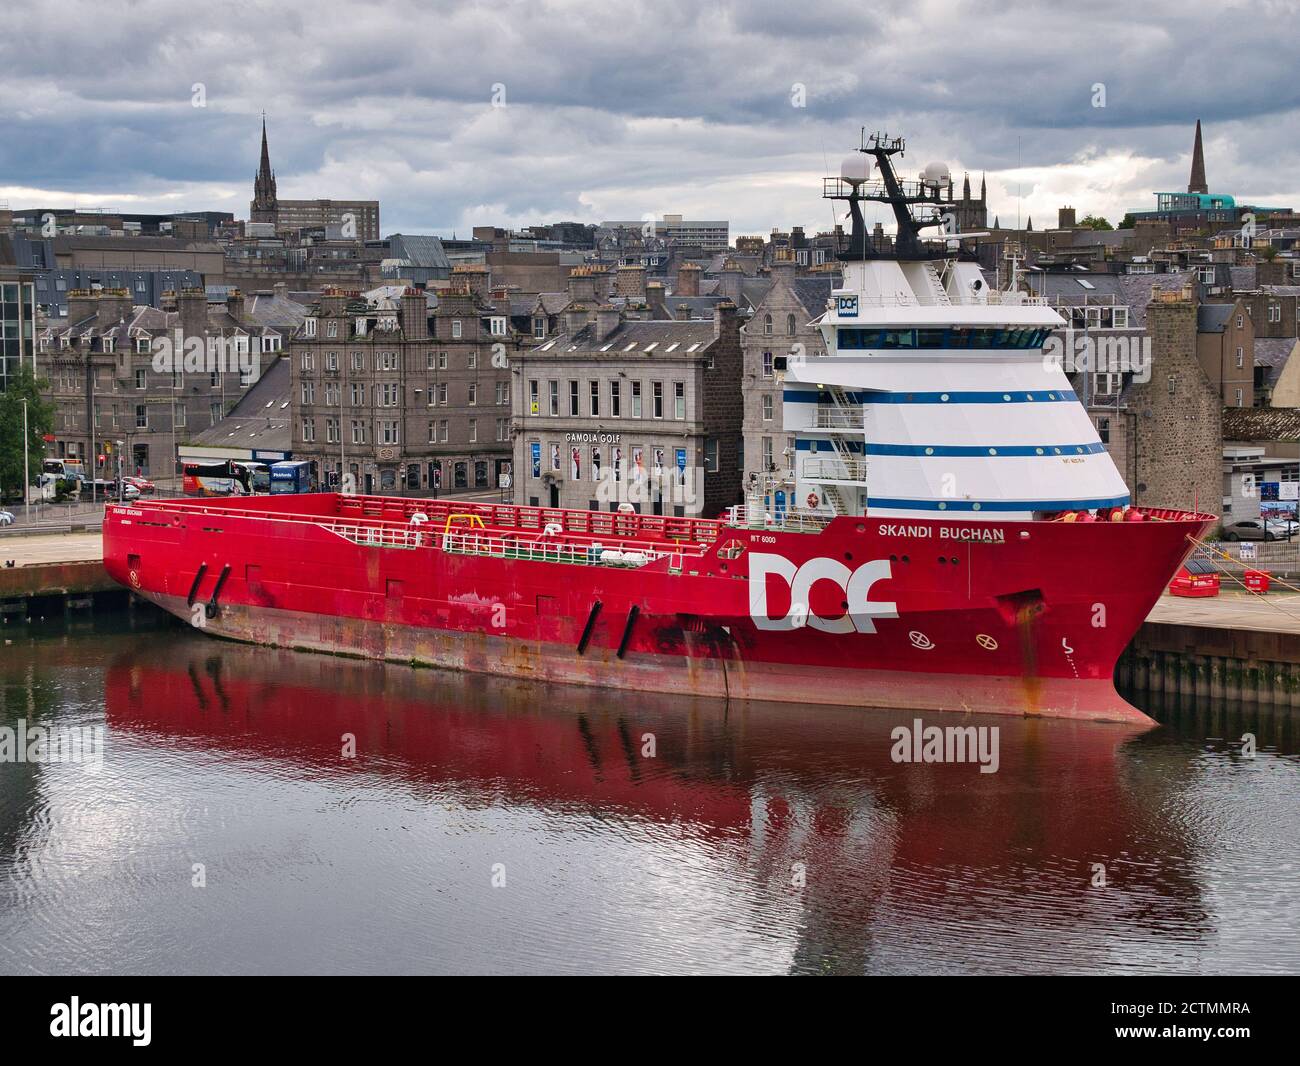 Skandi Buchan berthed in the port of Aberdeen, Scotland, UK - this ship is a Platform Supply Vessel operating in the North Sea, built in 2002 Stock Photo